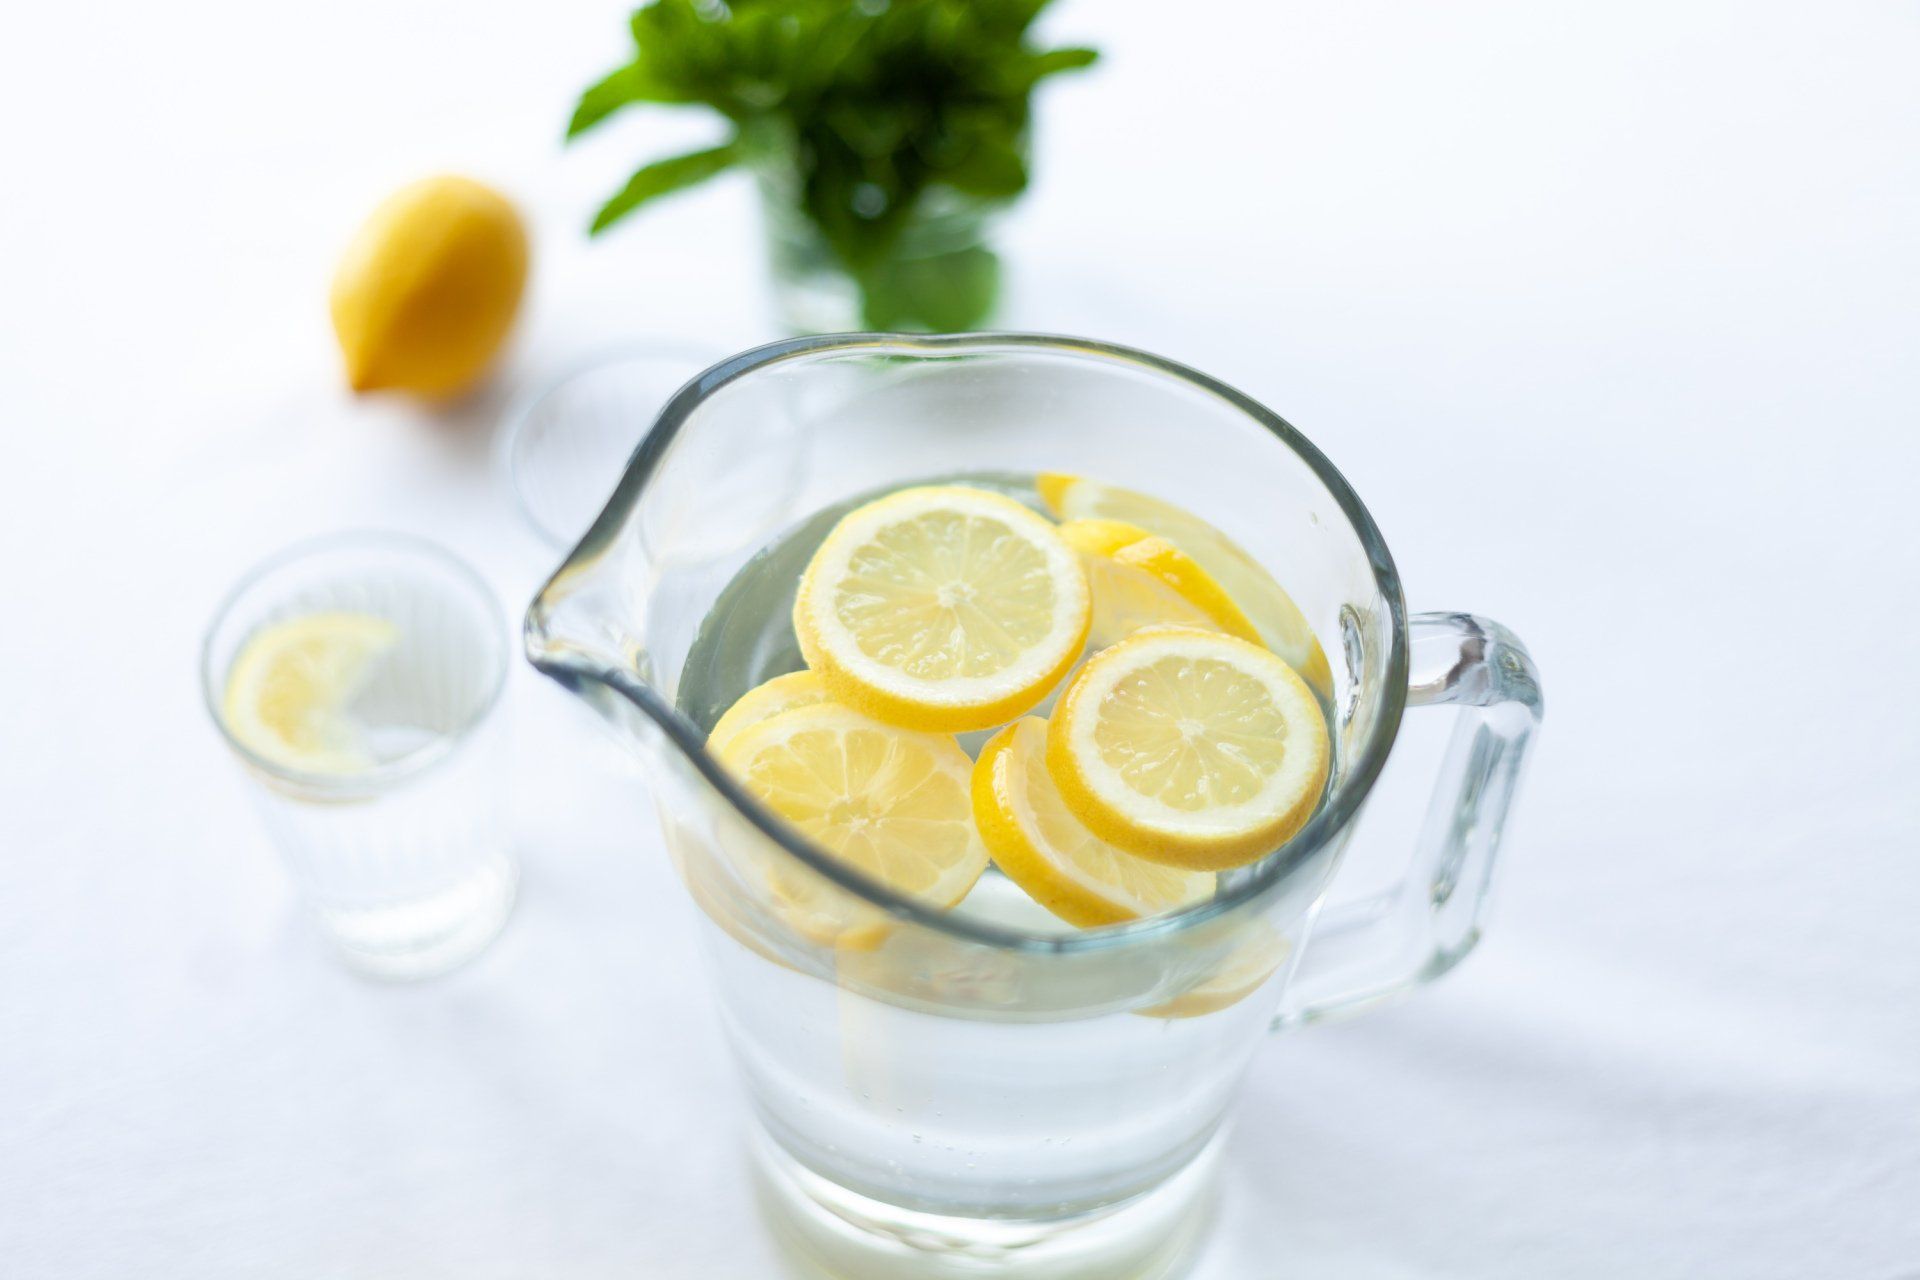 A pitcher of water with lemon slices in it.